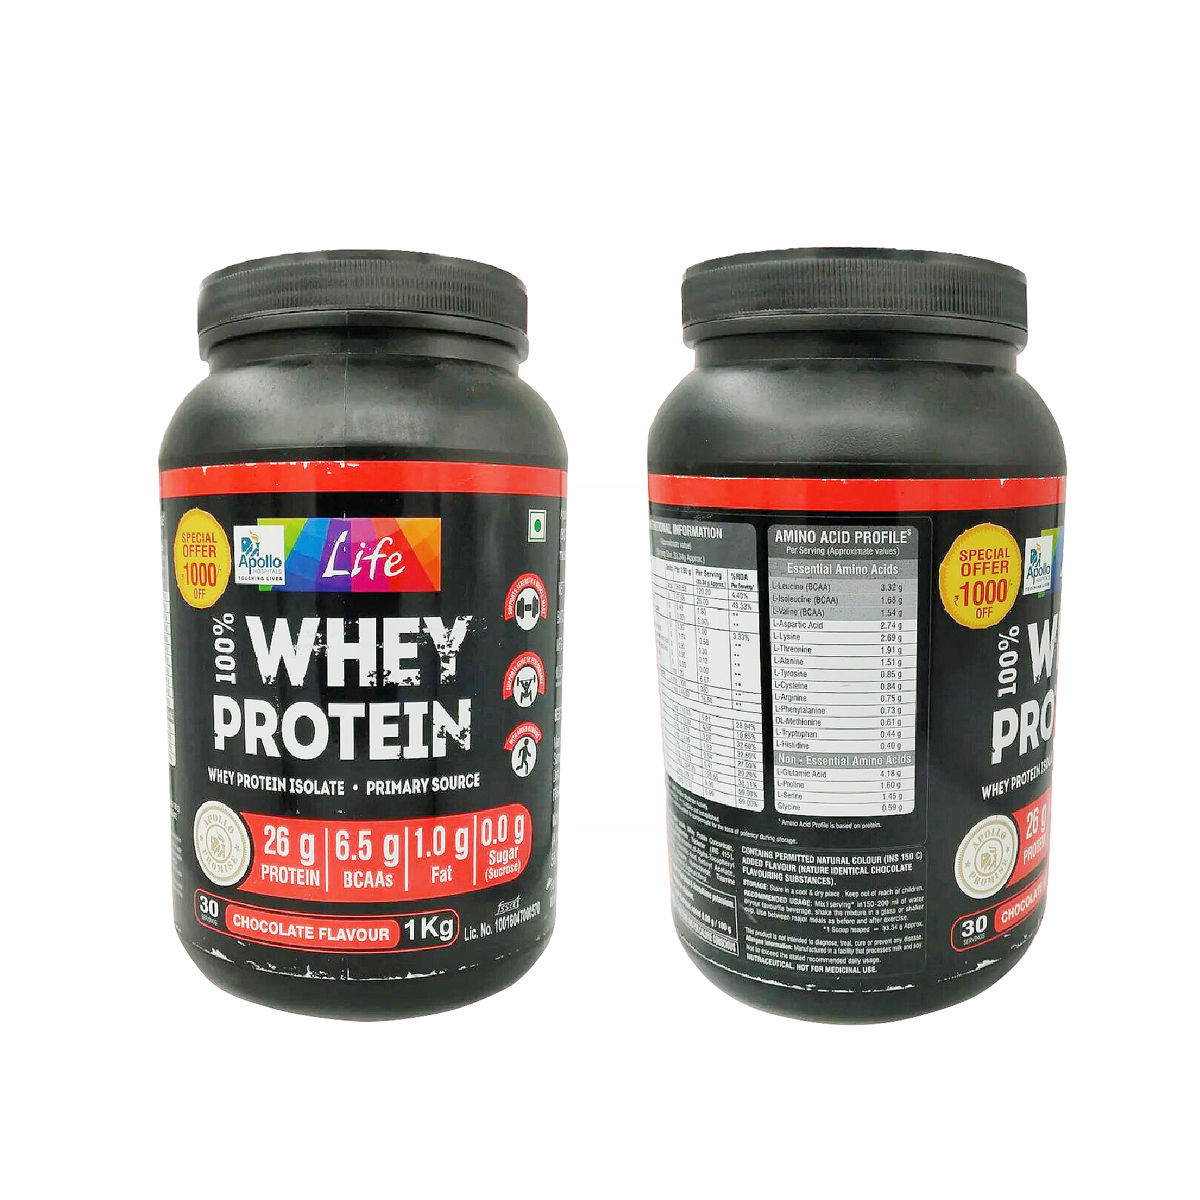 Apollo Life Whey Protein Chocolate Flavour Powder, 1 Kg, Pack of 1 